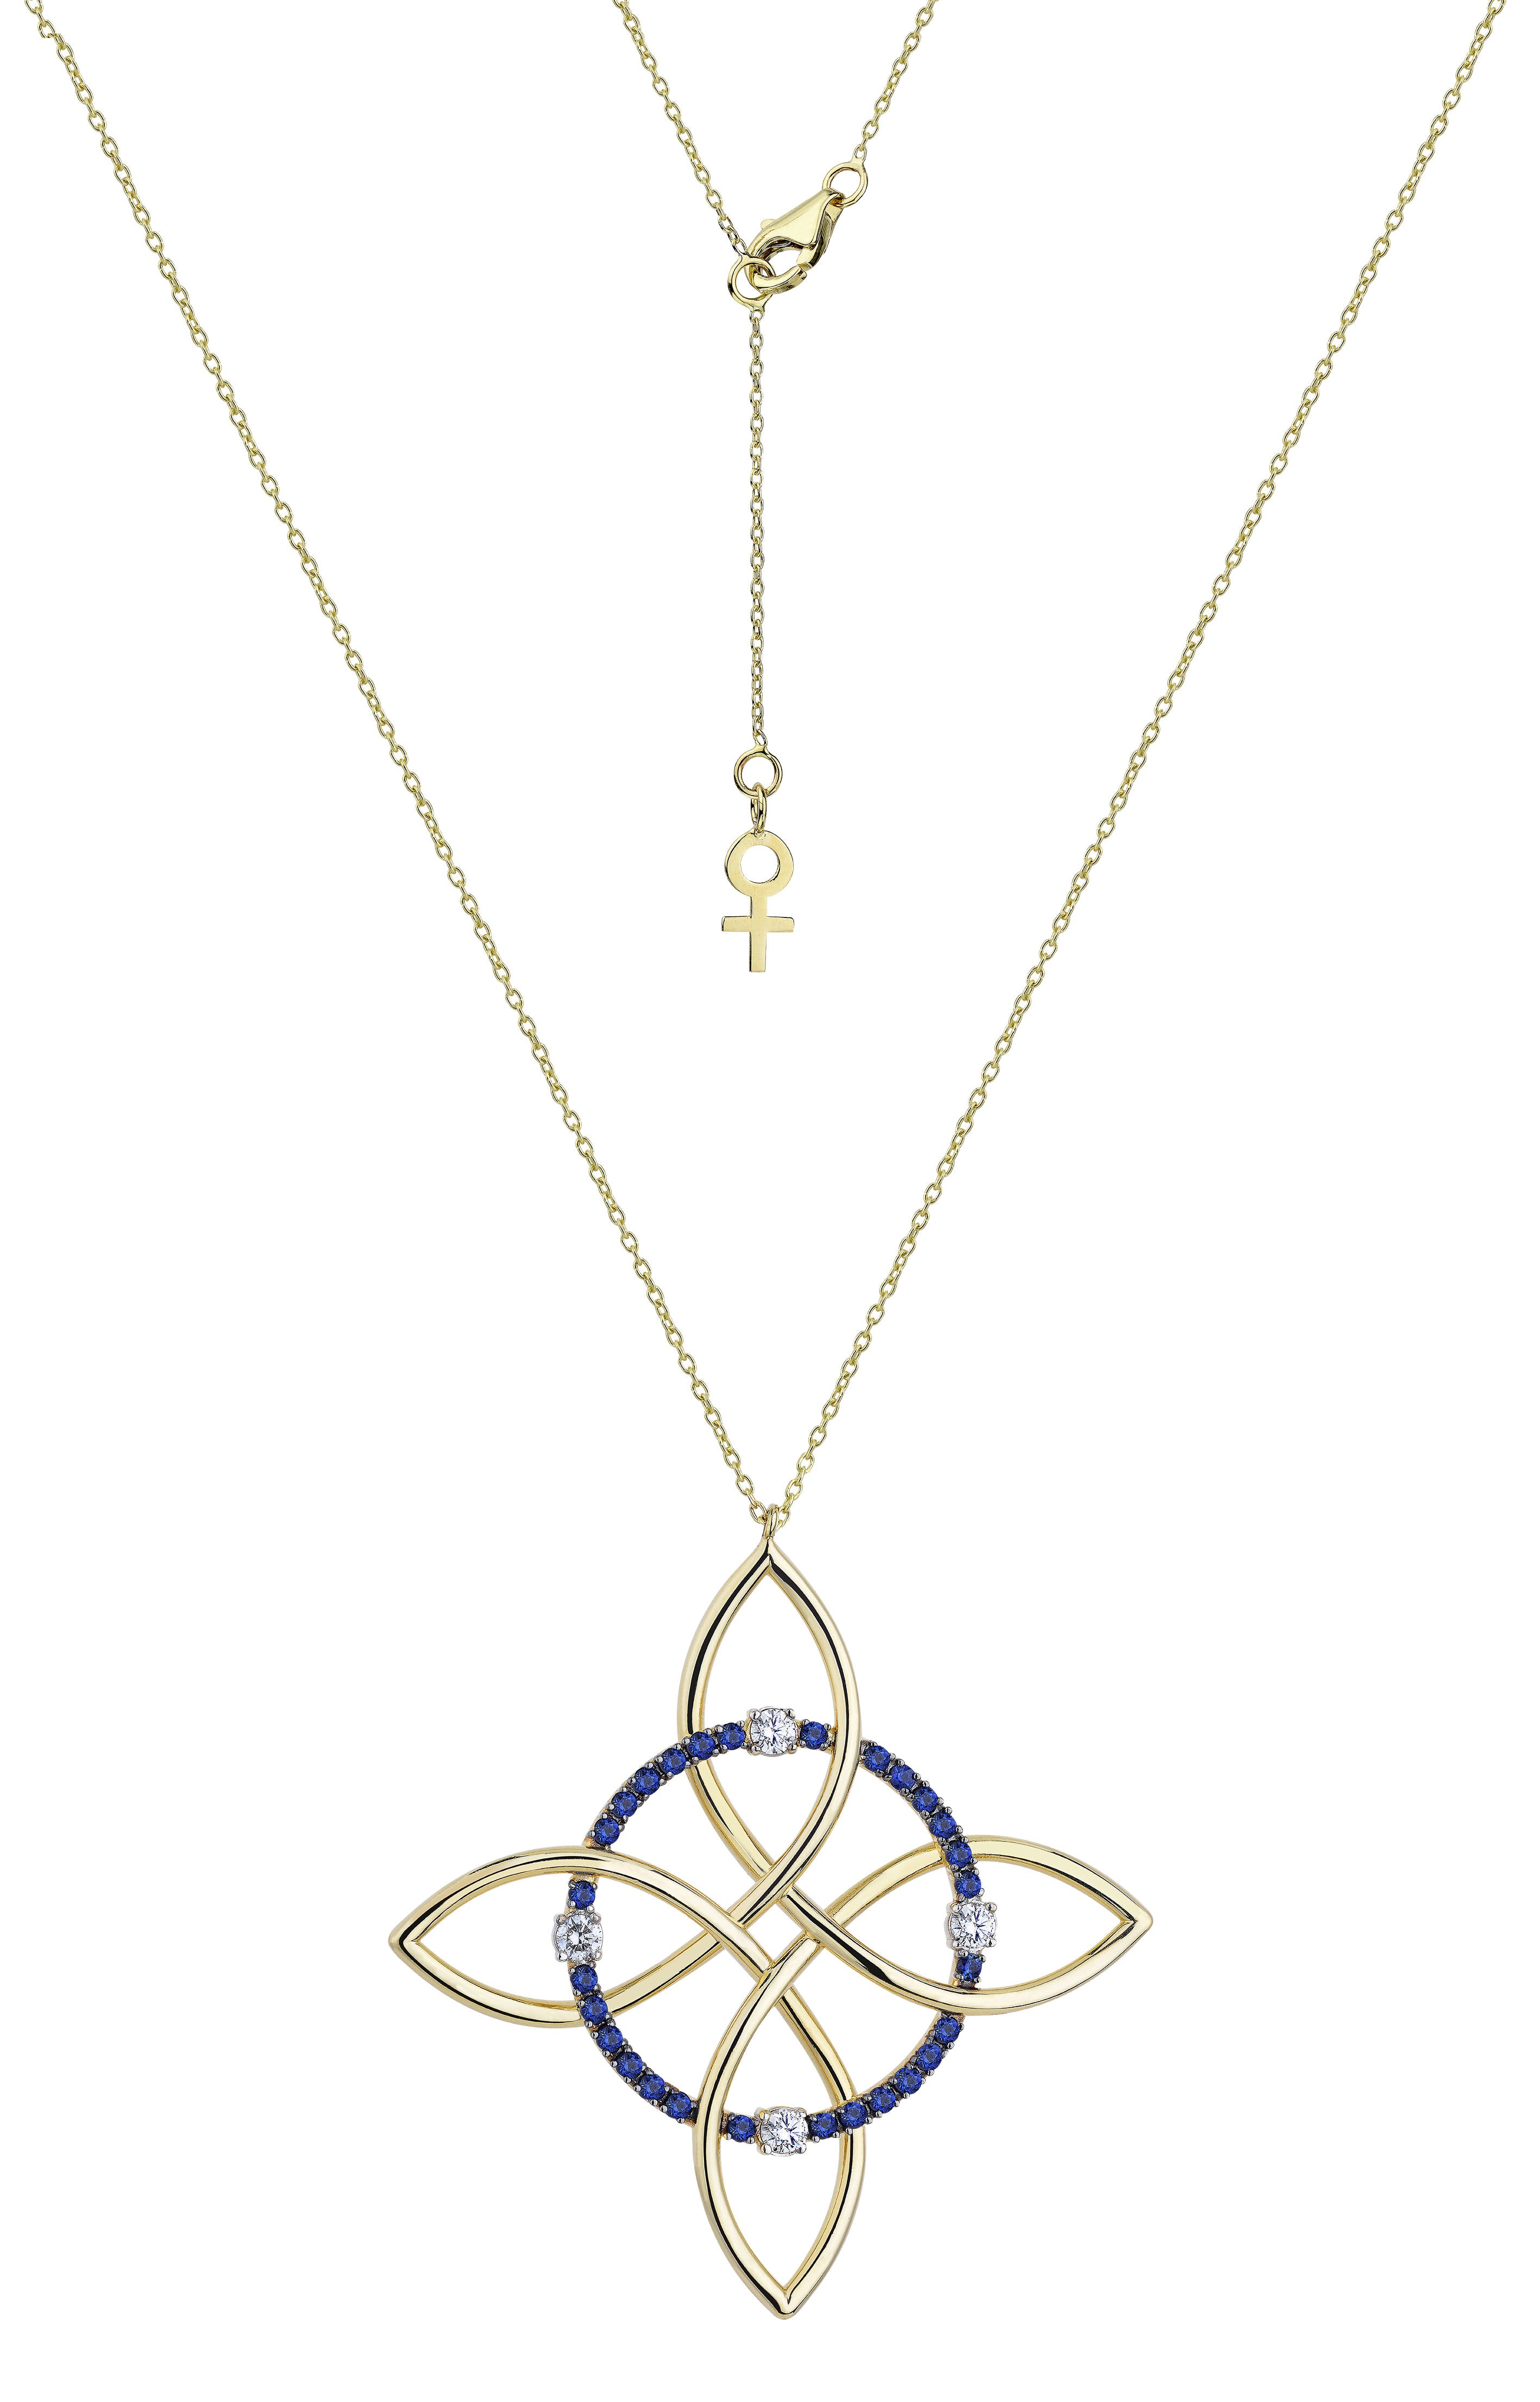 Magnific Magic Knot Necklace in Yellow Gold - Her Story Shop